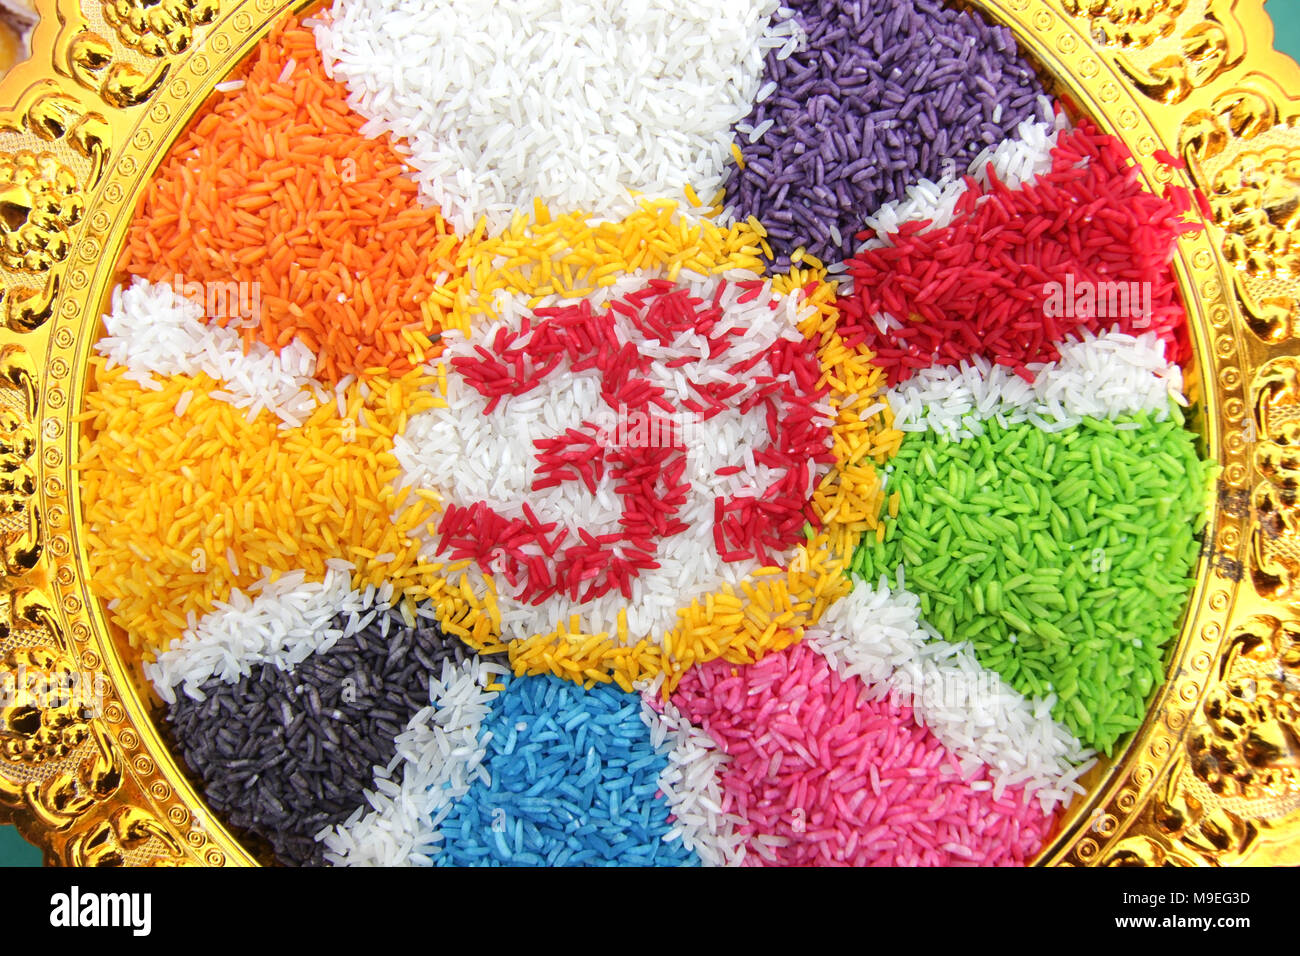 colorful hindu aum om symbol made from rice Stock Photo